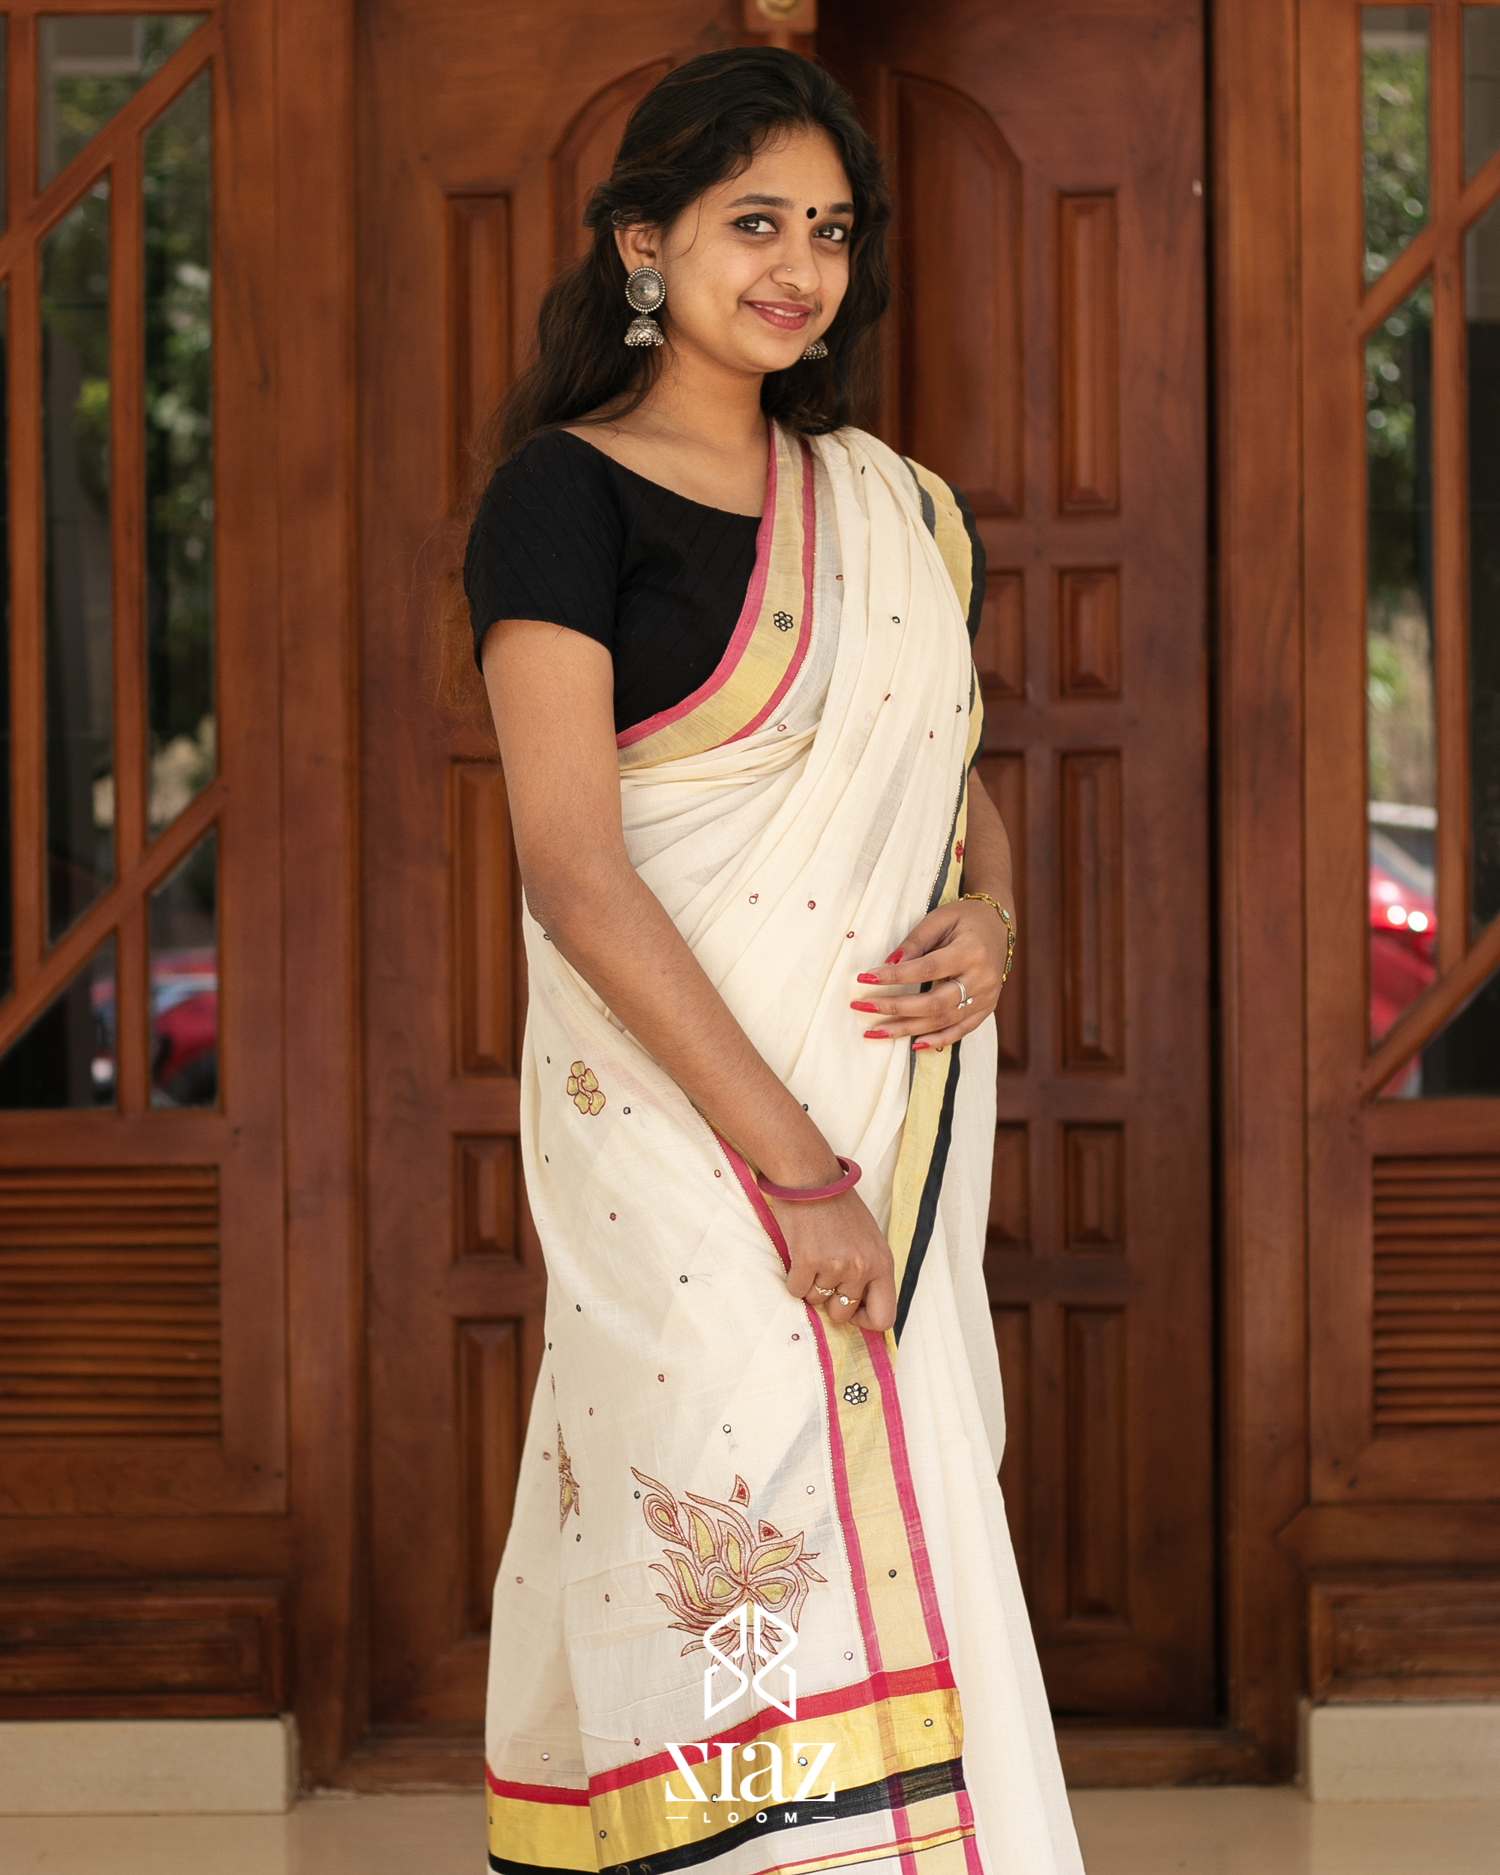 New Trend Blouse Designs for Kerala Sarees | Kerala saree, Blouse designs,  Fashion design